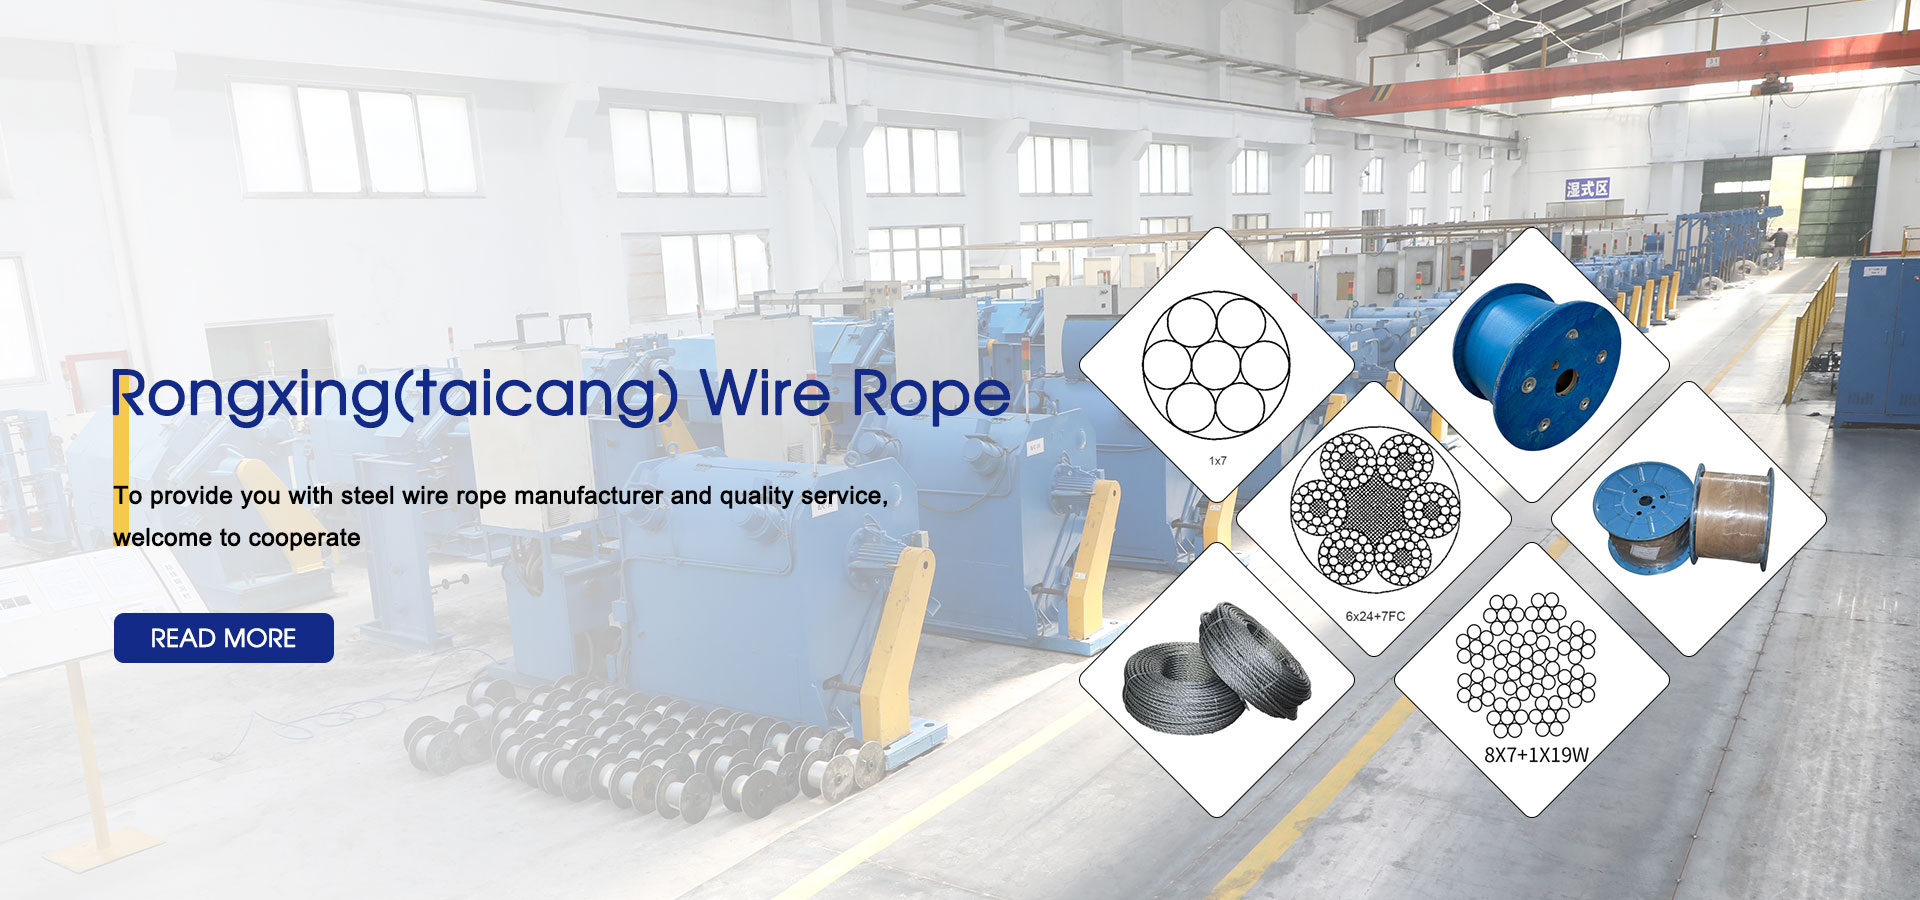 China Steel Wire Manufacturers